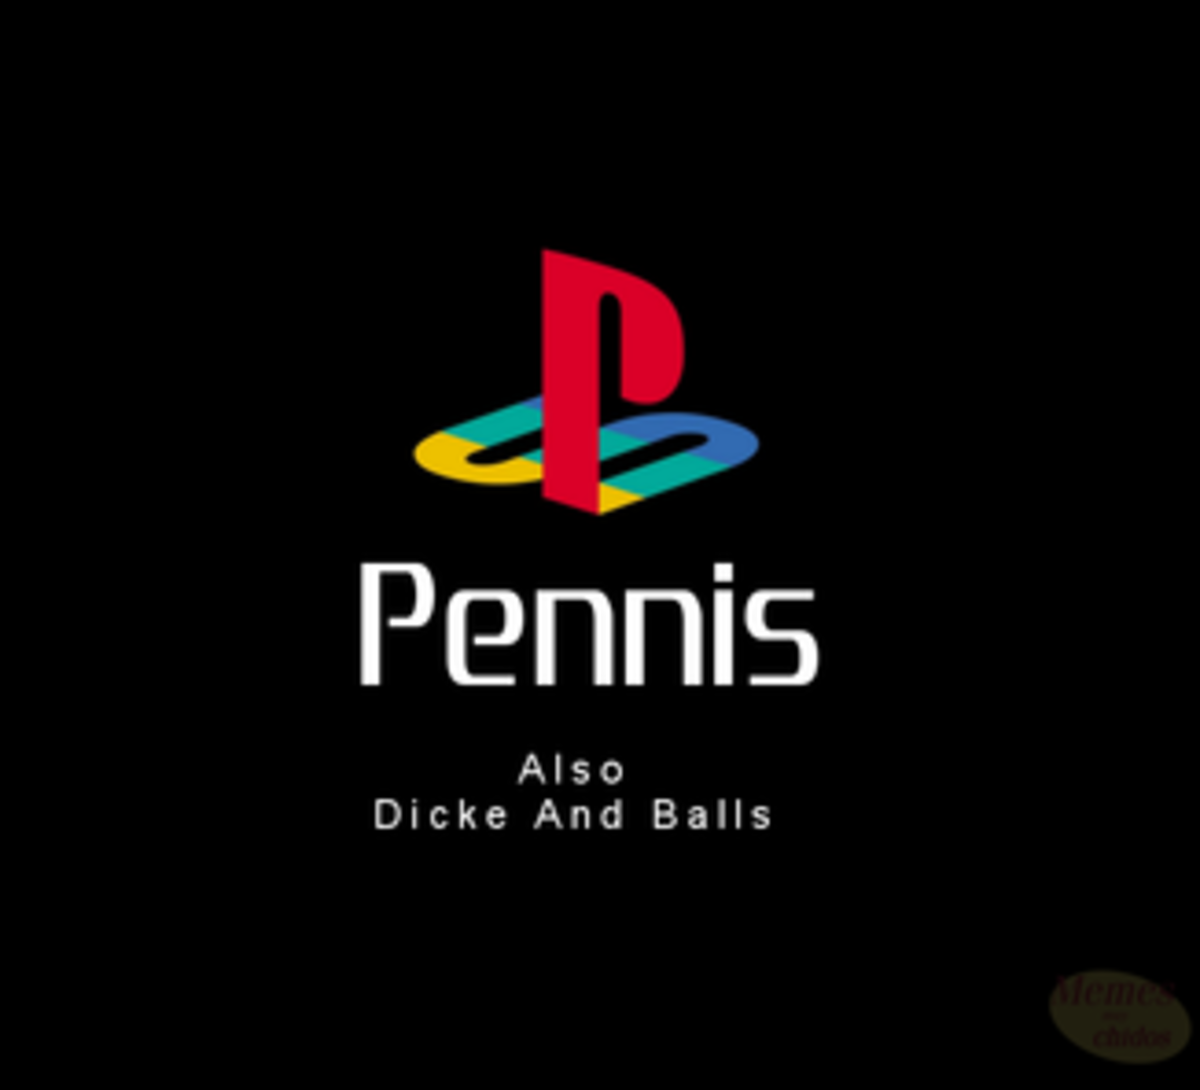 Dicke and balls